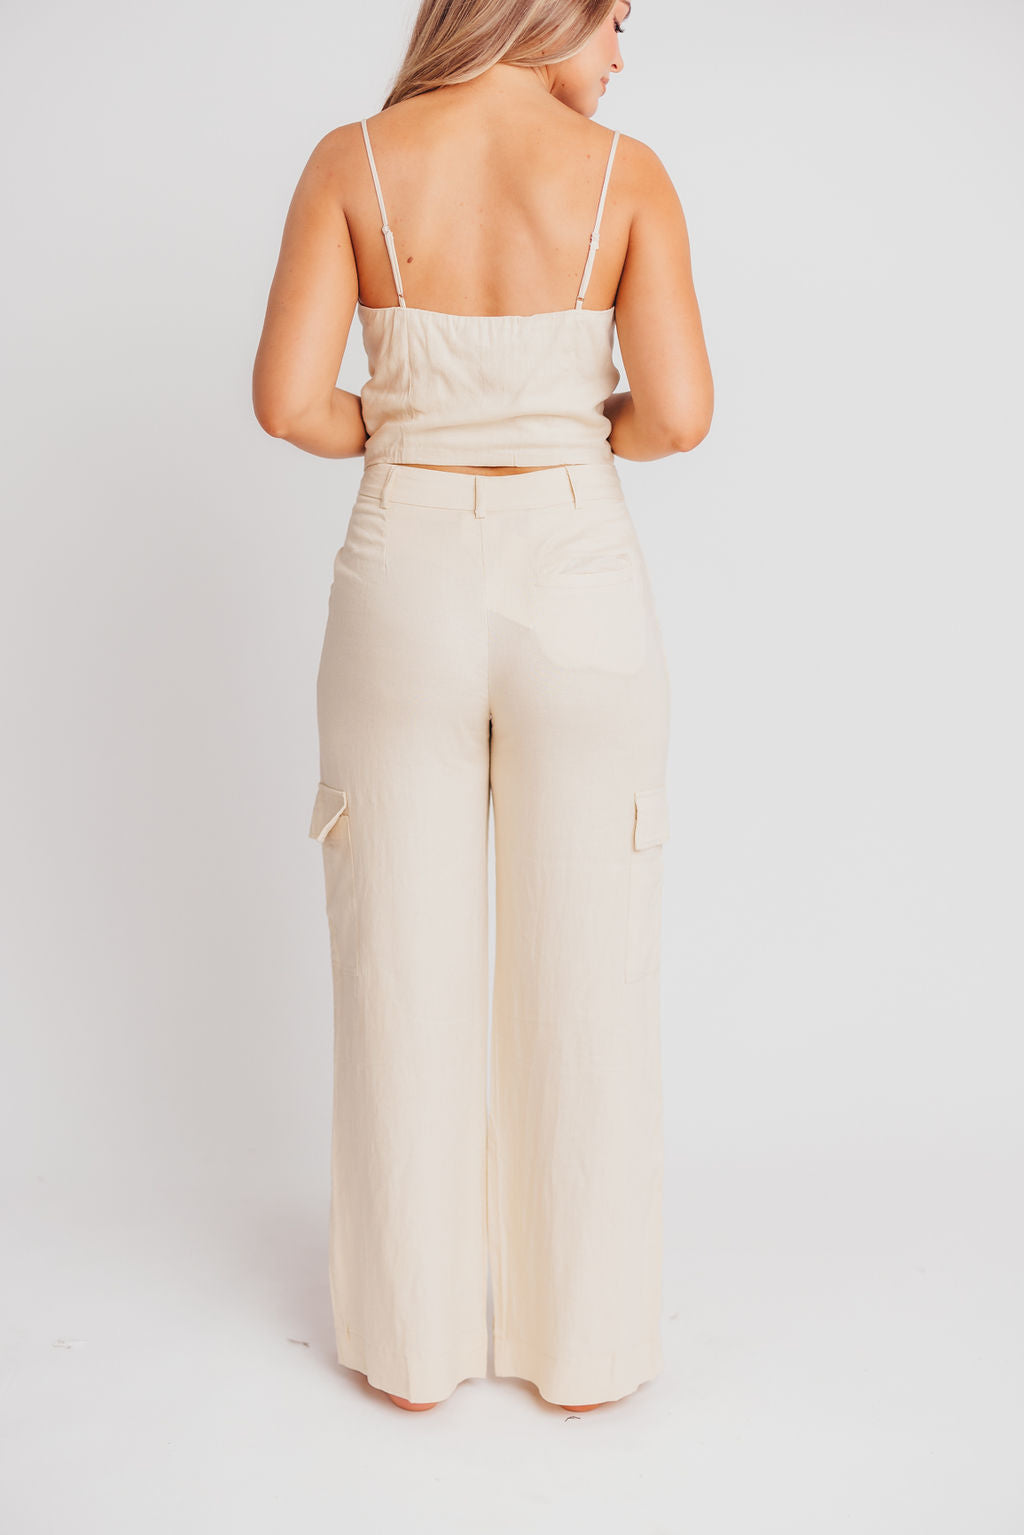 McKenna Cropped Tank and Cargo Pant Set in Jute